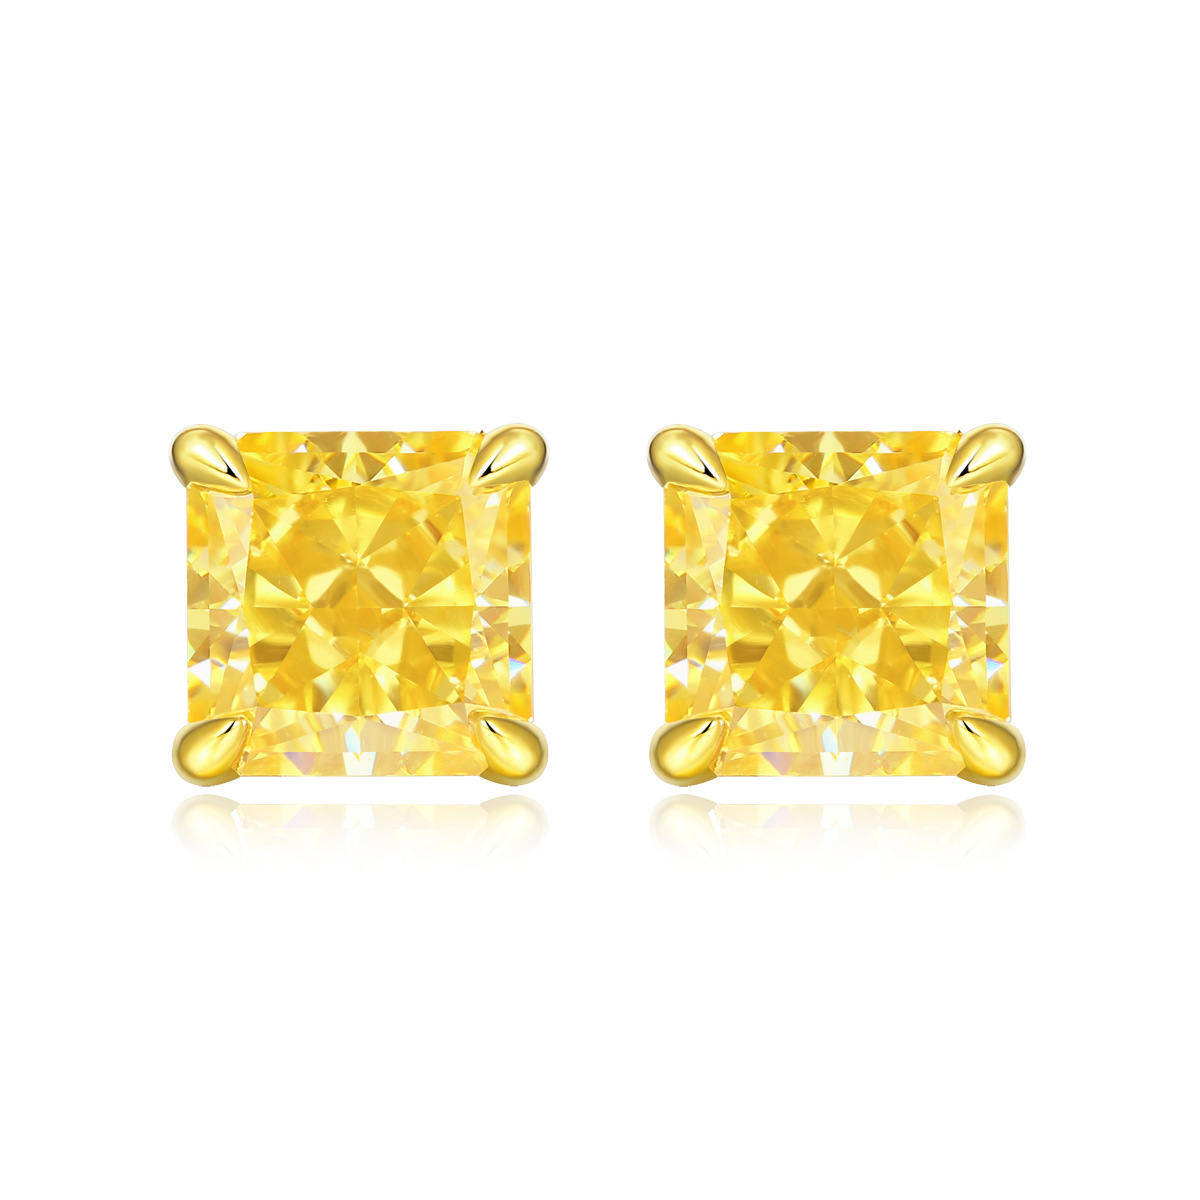 8.60 Ct High Carbon Diamond Sterling Silver Earrings